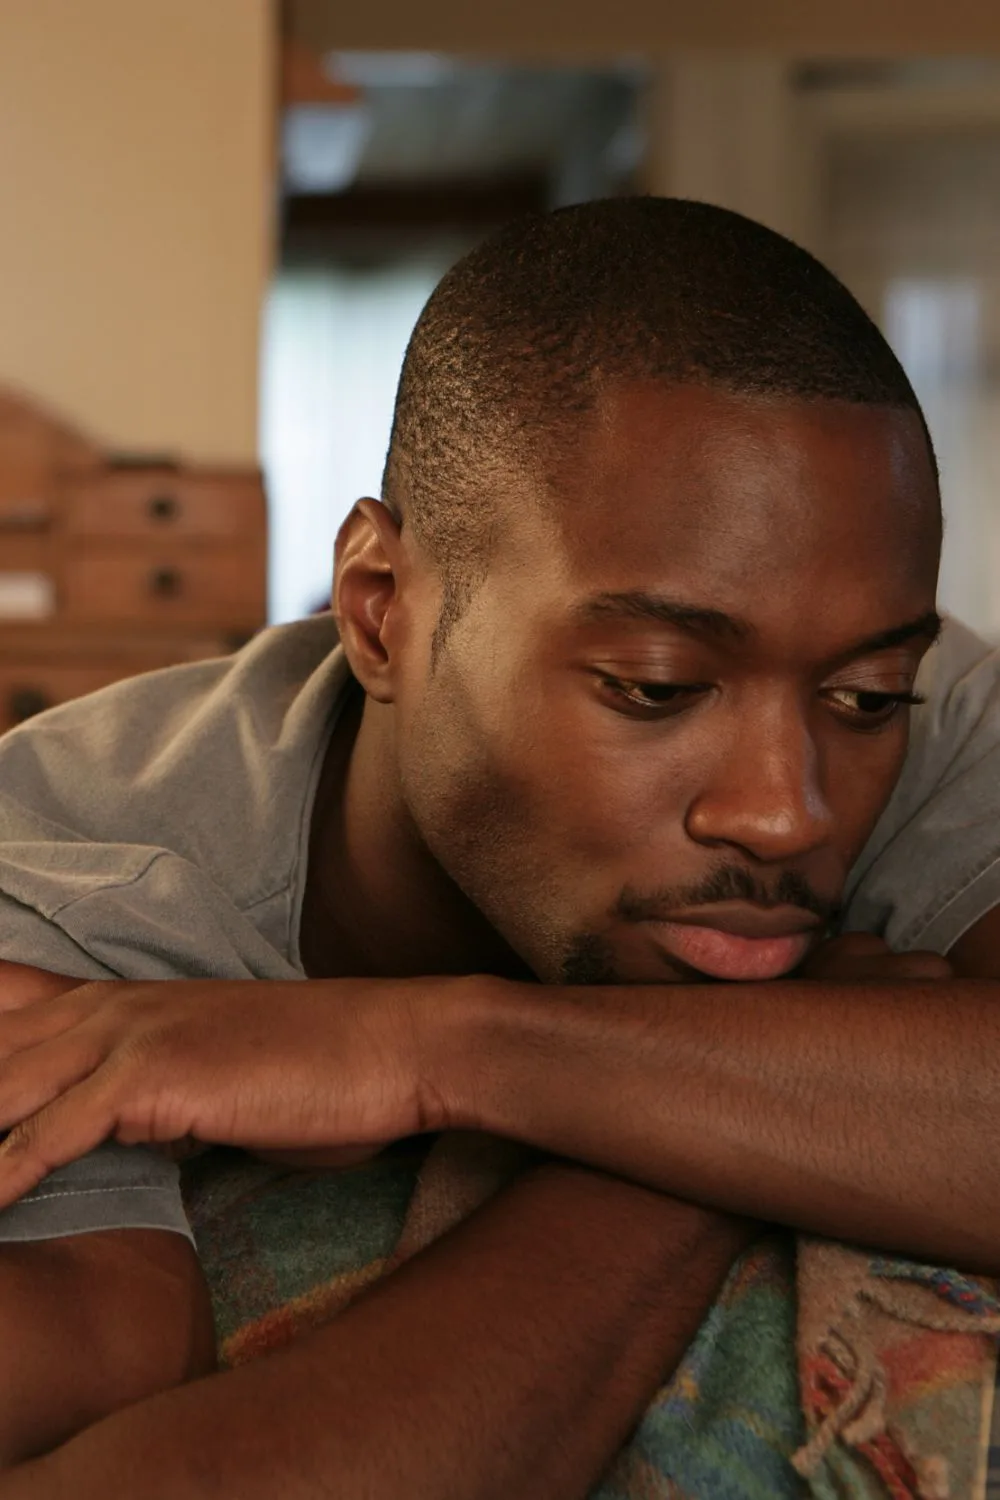 8 Effective Tips for Helping Your Insecure Boyfriend